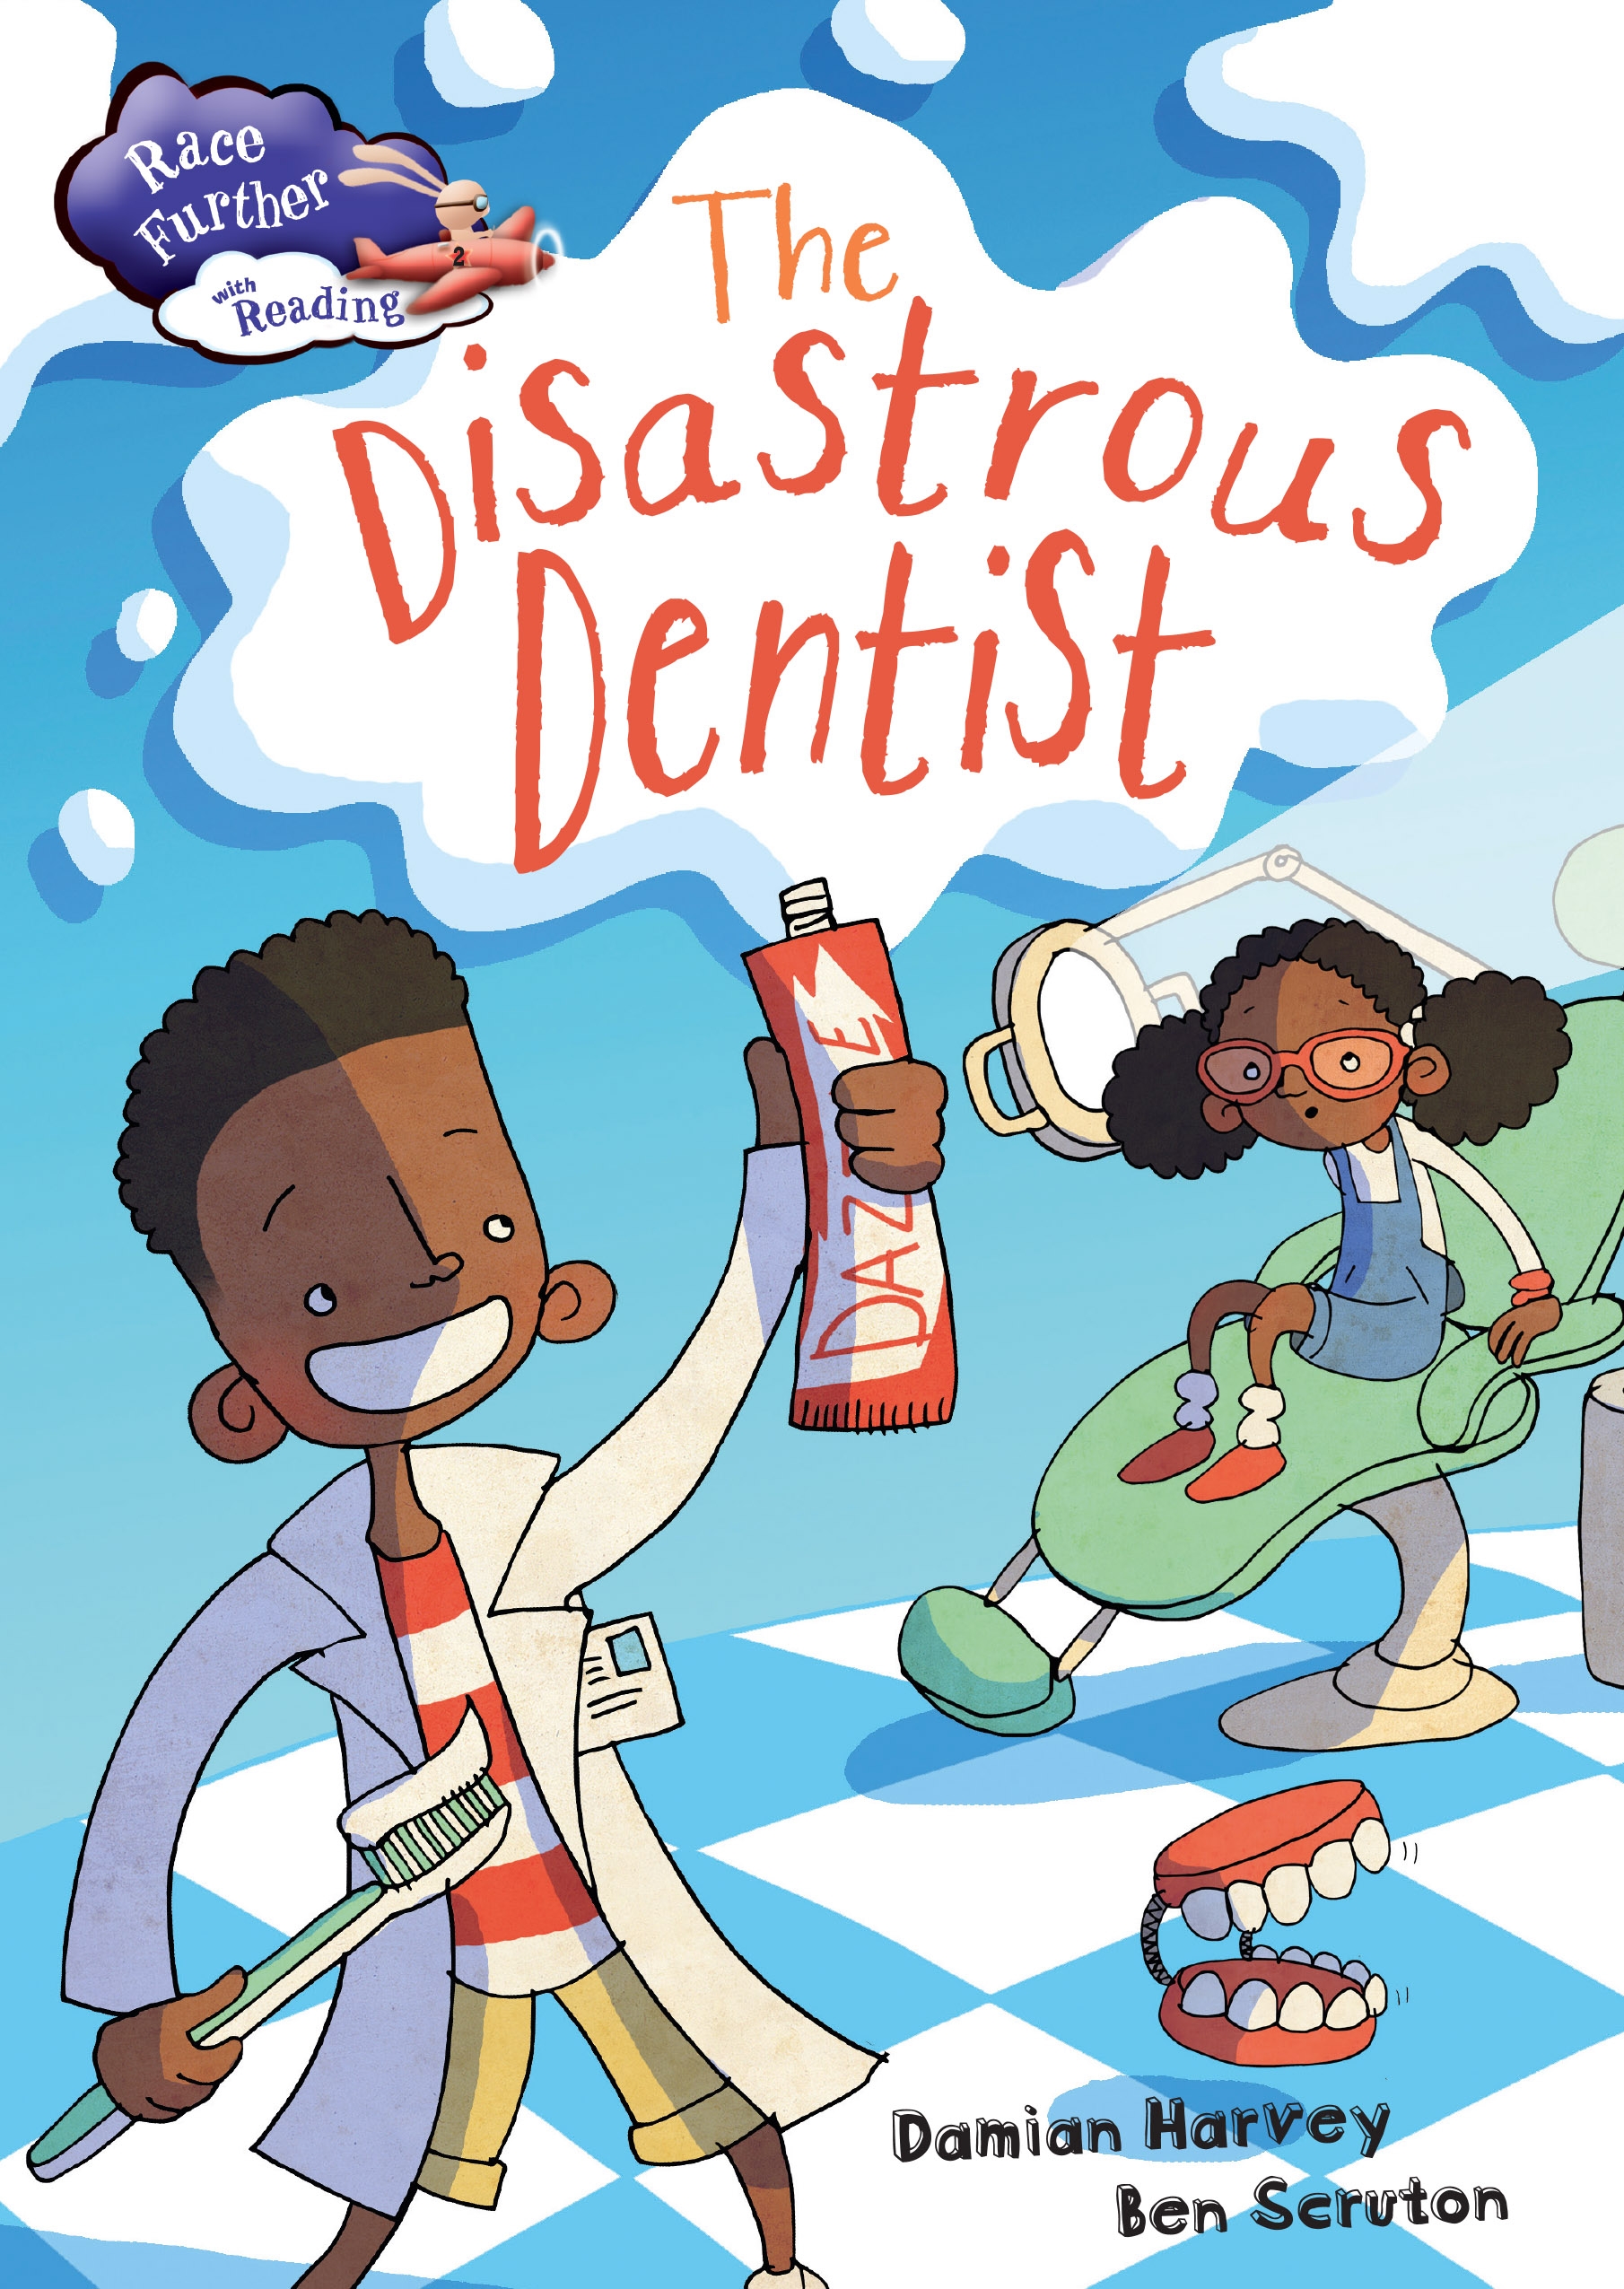 Race Further with Reading: The Disastrous Dentist by Damian Harvey |  Hachette UK